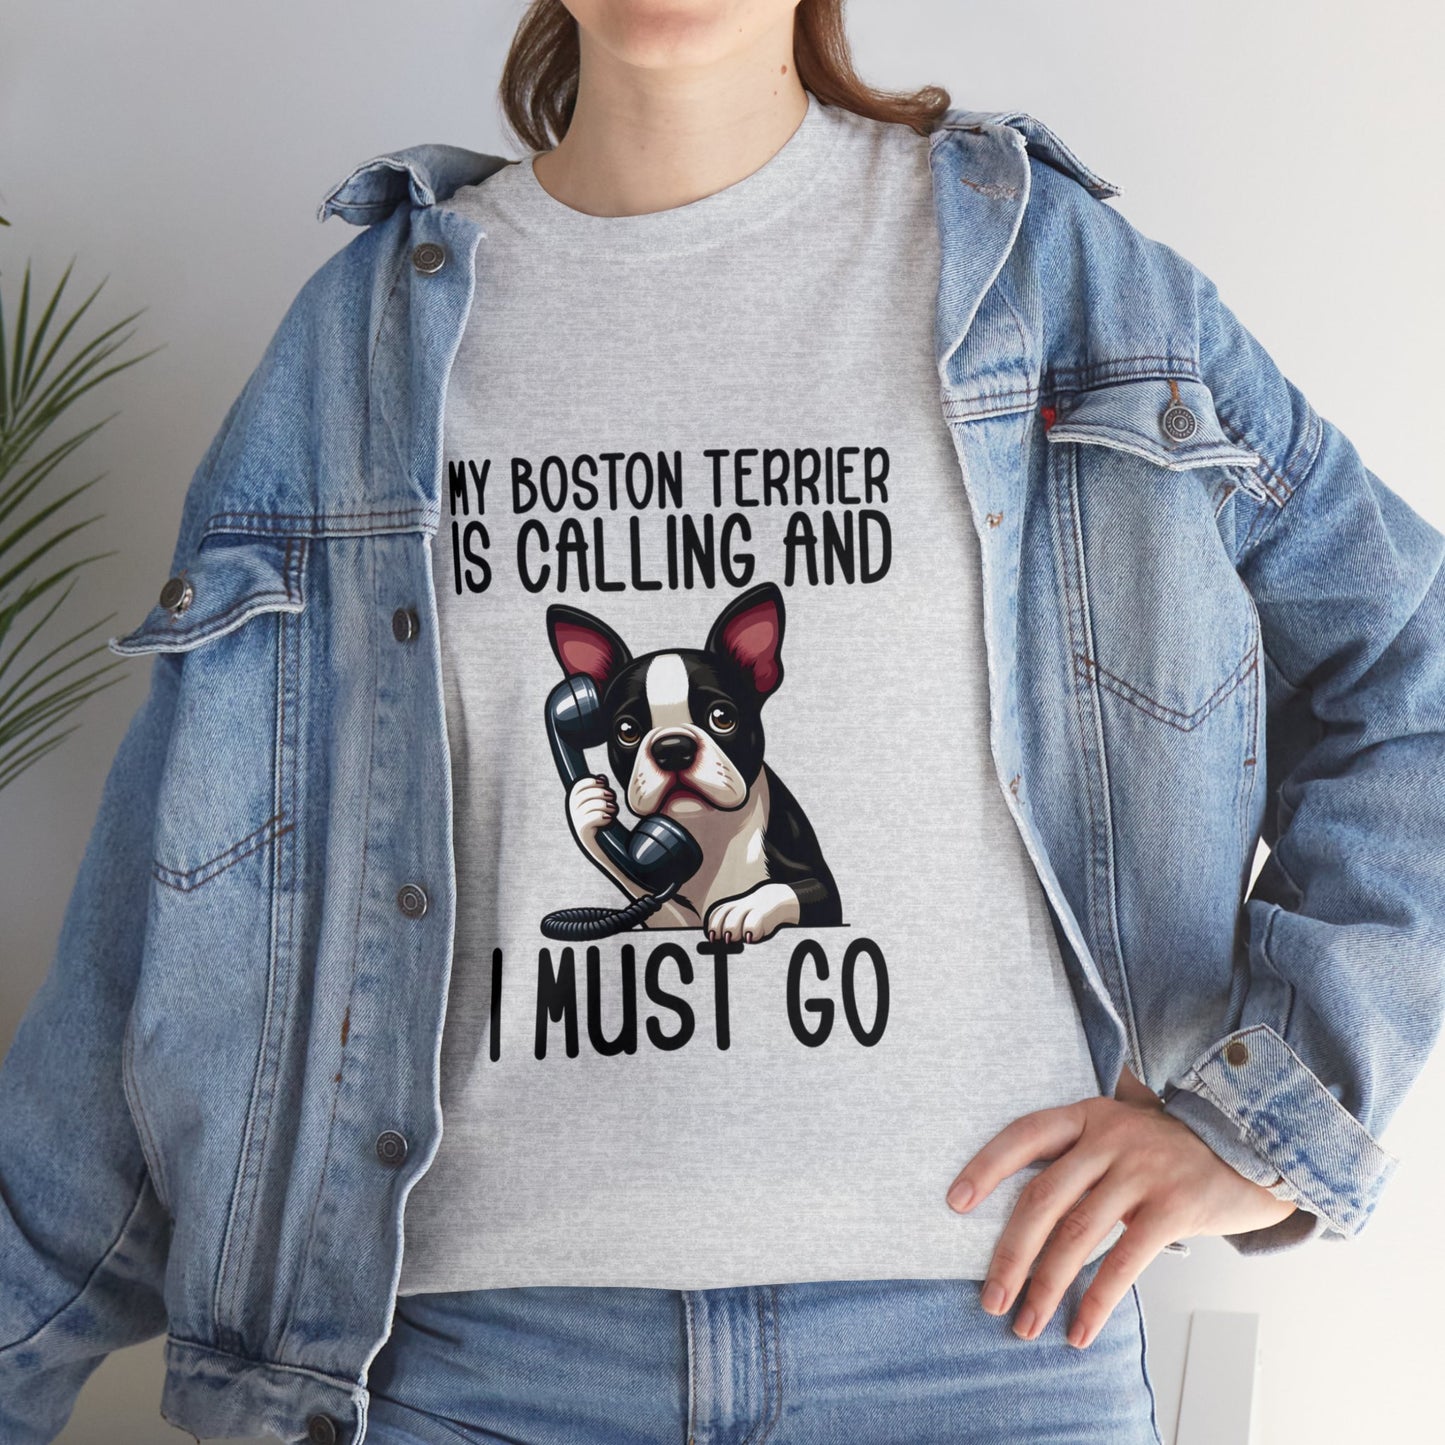 Chase - Unisex Tshirts for Boston Terrier Lovers